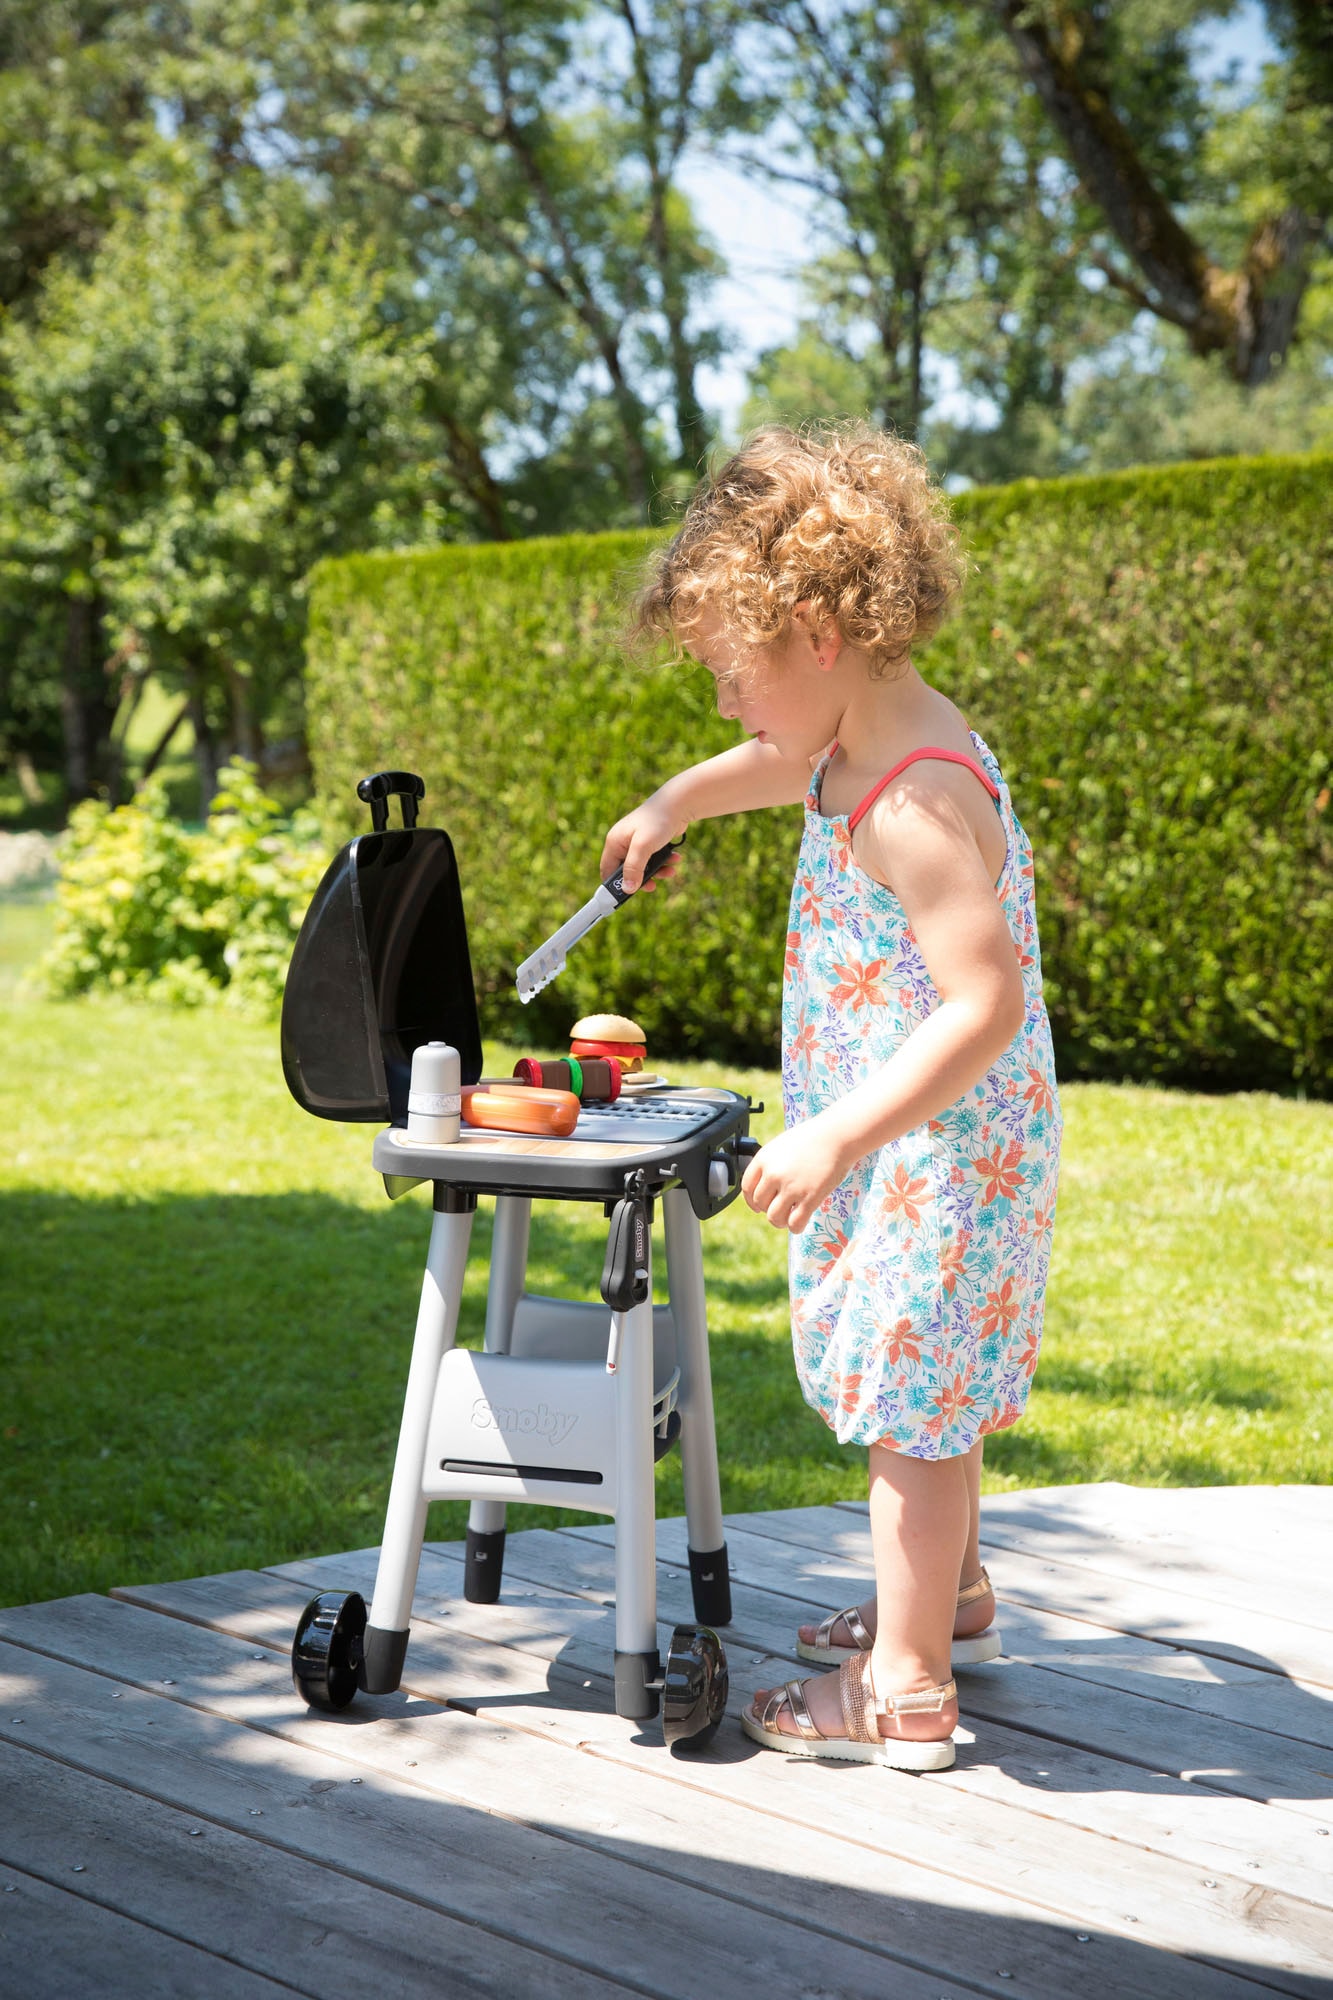 »Barbecue«, in Smoby Europe Kinder-Grill Made bei